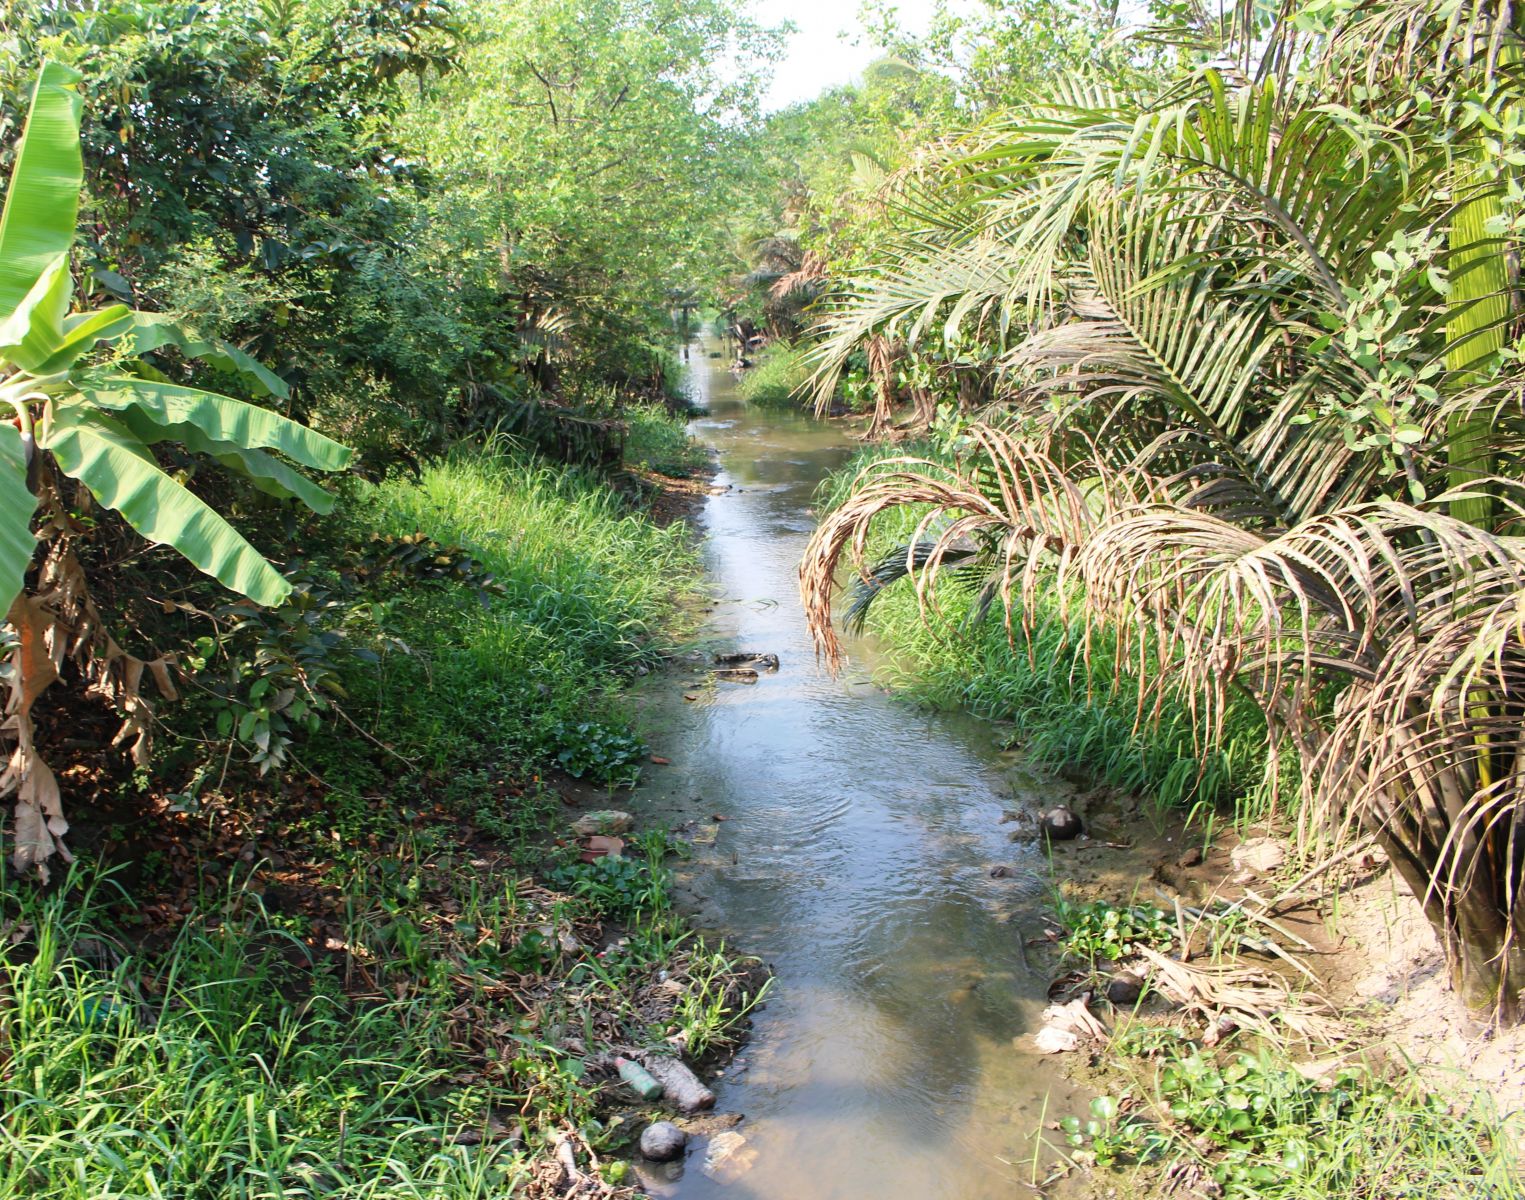 The channels and canals in Tan Tru district have very little water